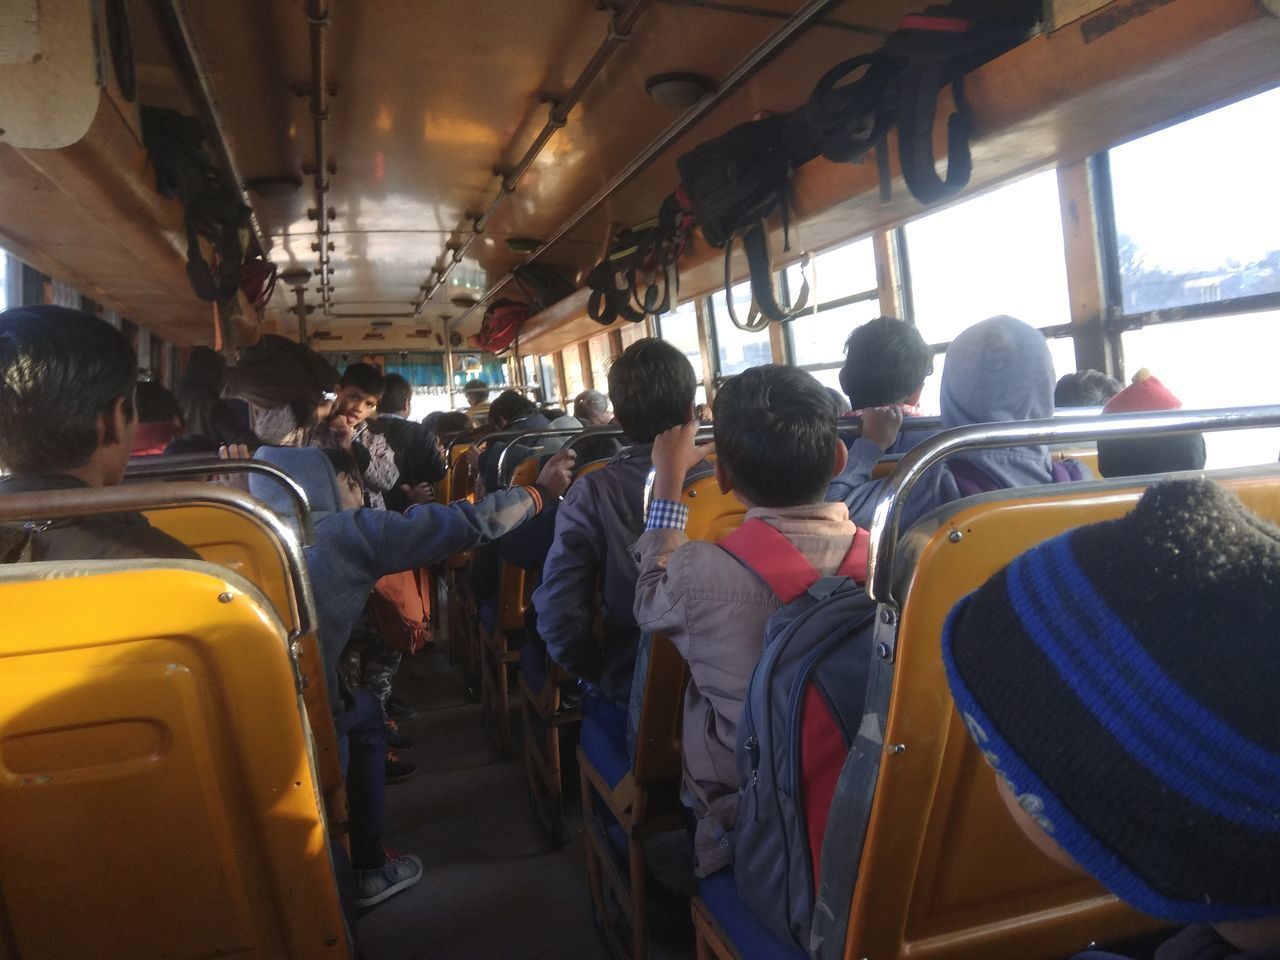 REAR VIEW OF PEOPLE WAITING IN BUS